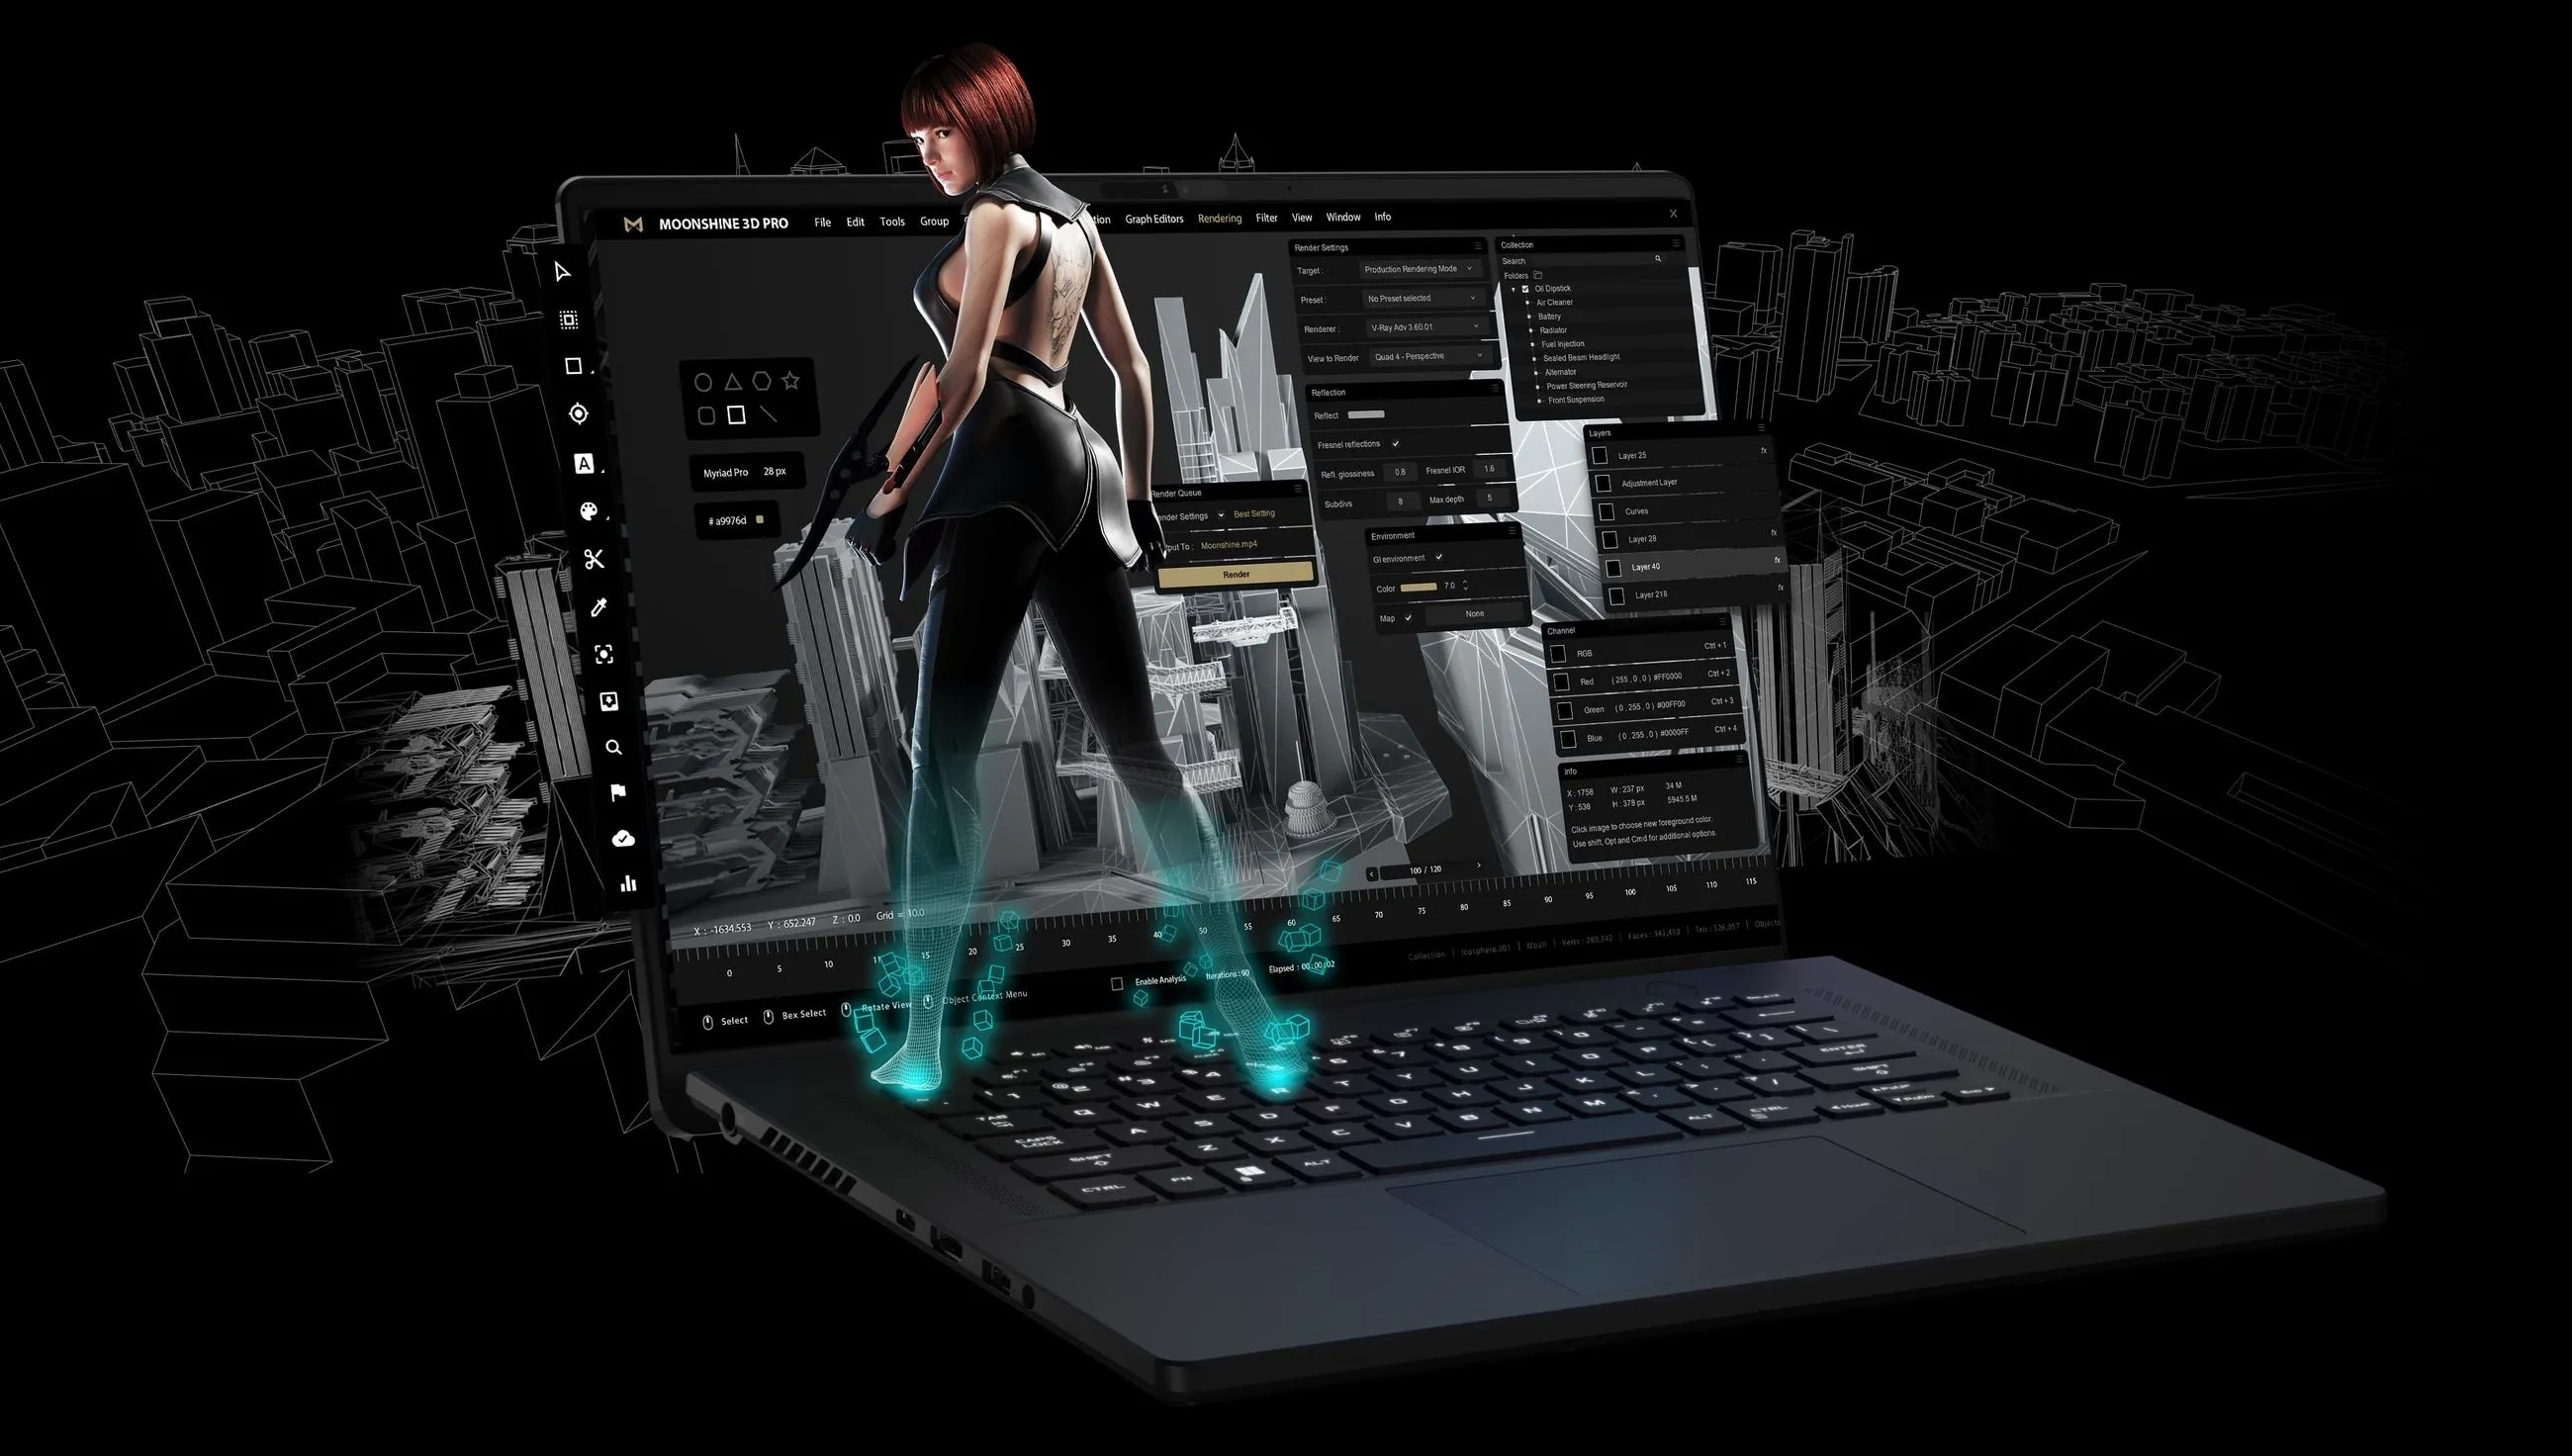 An Asus gaming laptop with a stylized cyberpunk woman standing over it.